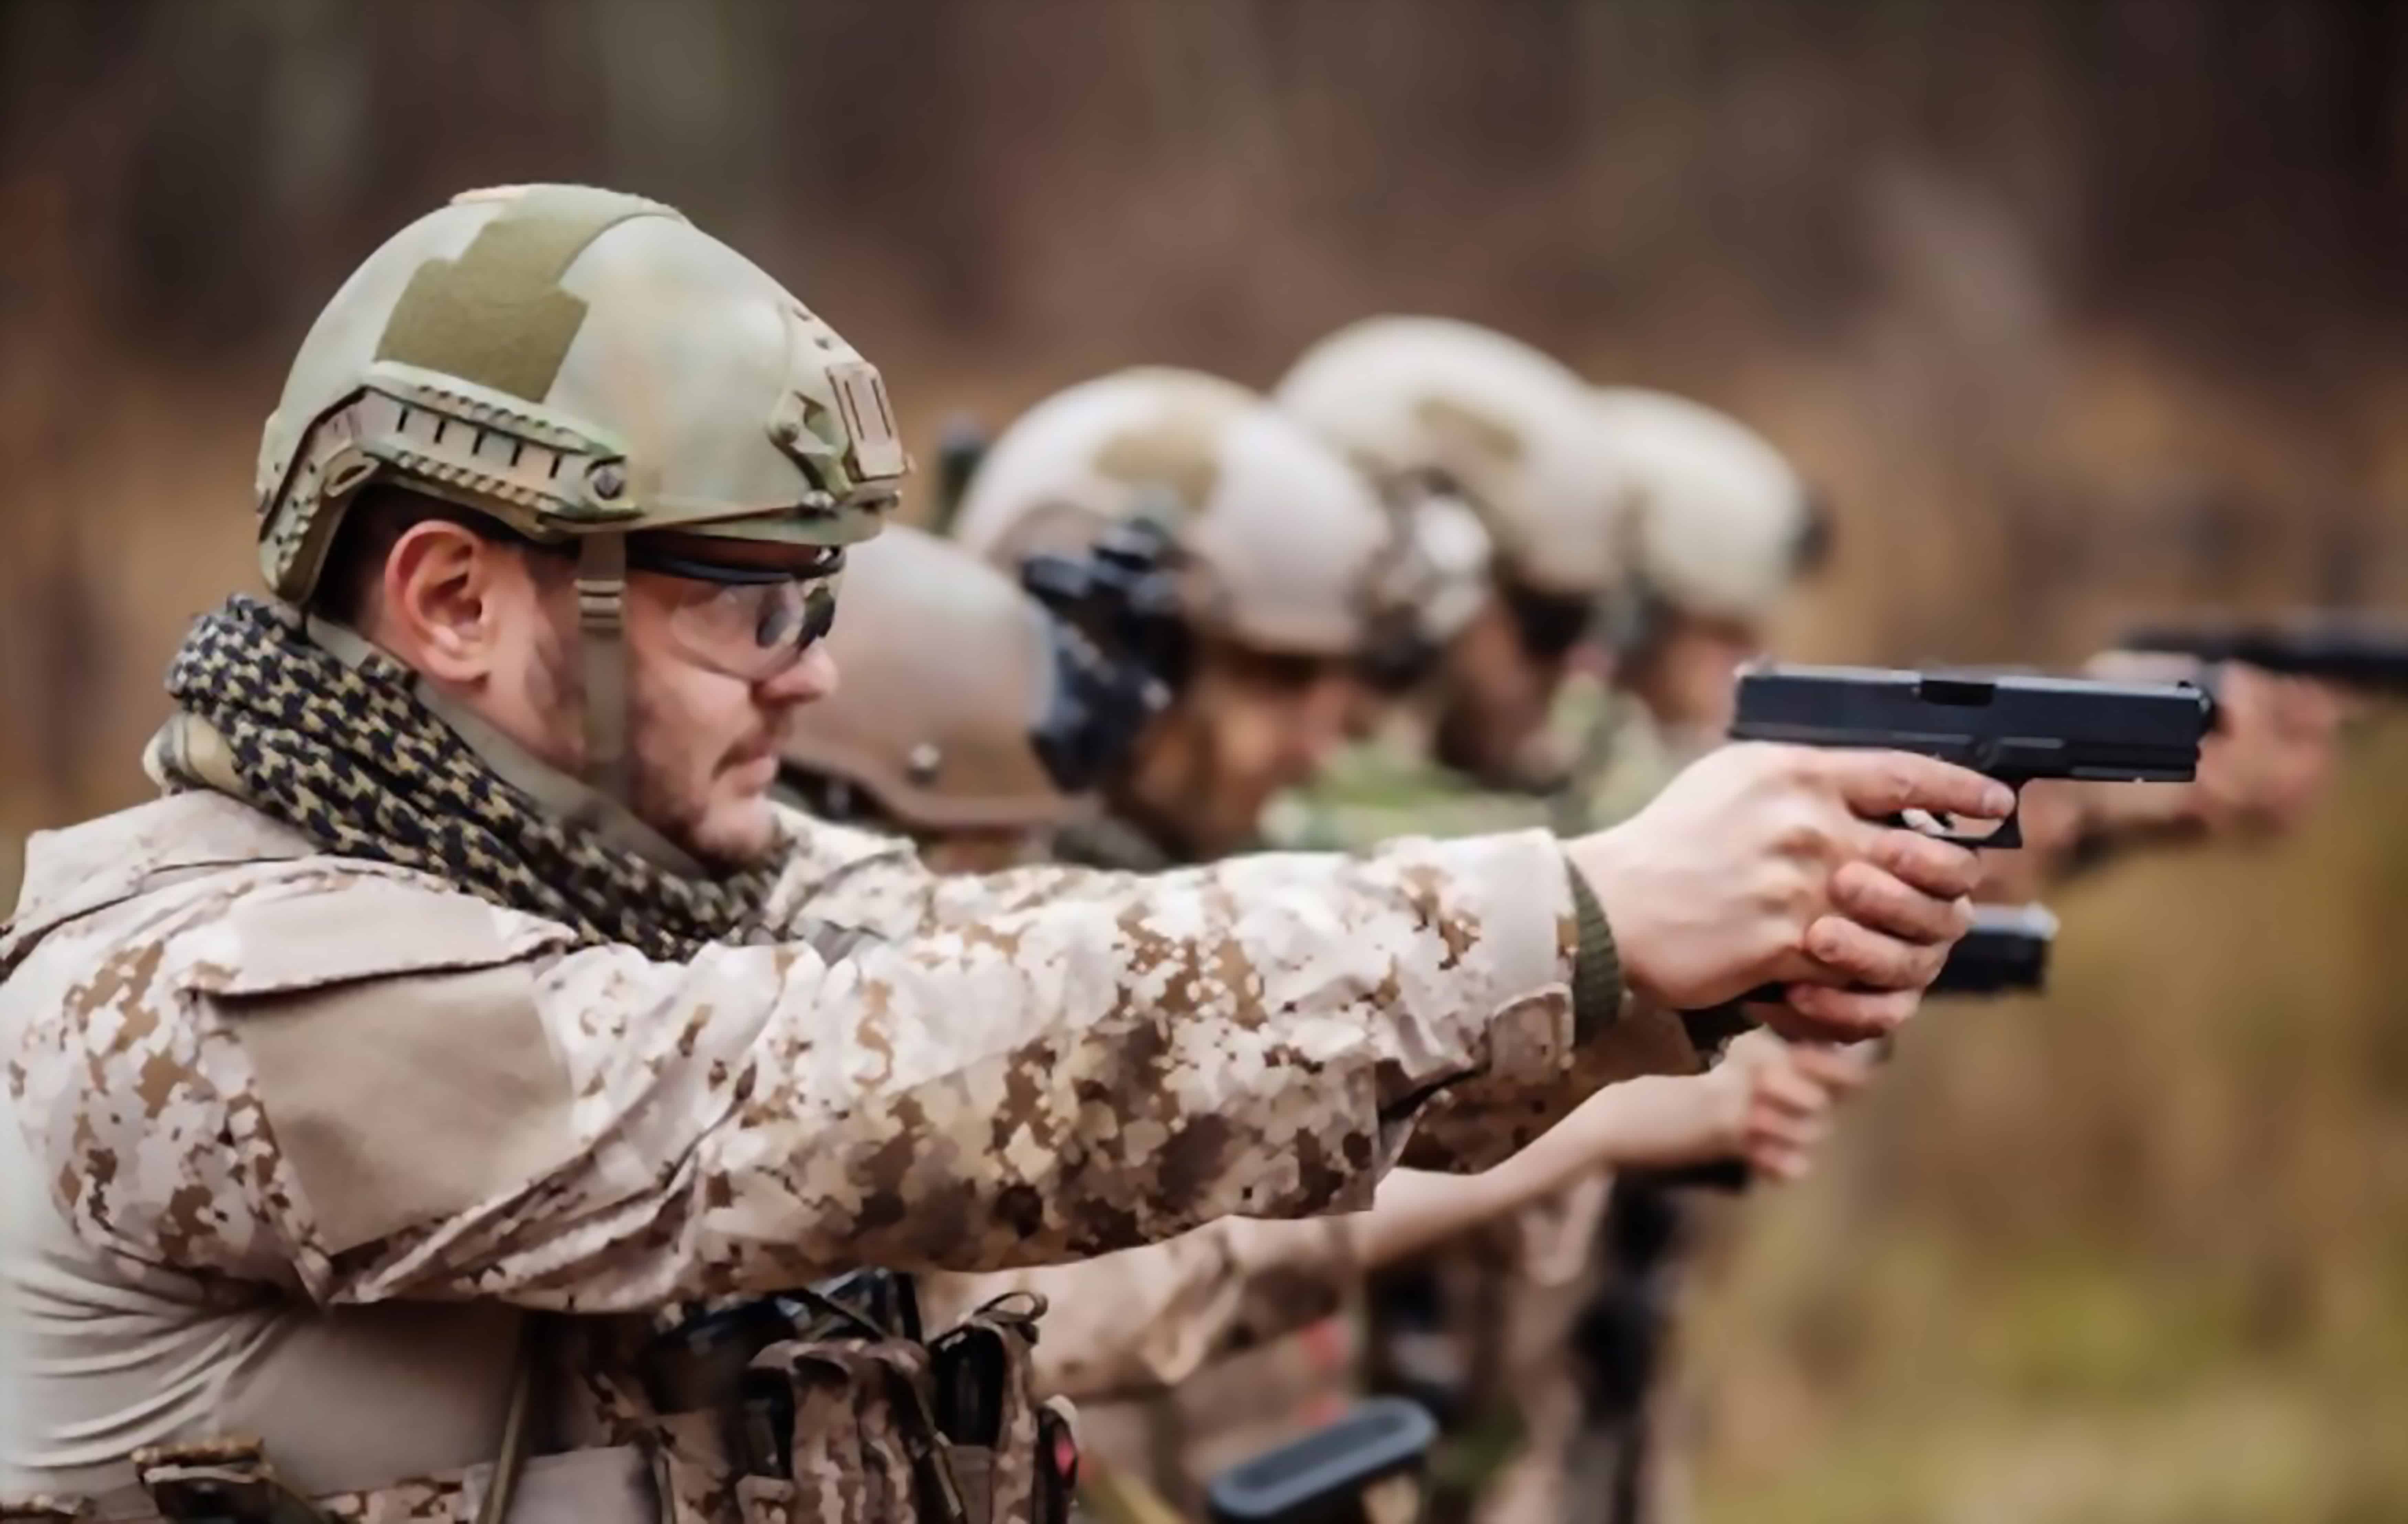 Benefits of CHL Texas for Military Service Members - LTC Range - Texas Carry Class For Military Members - Online Carry Class - Military Concealed Carry